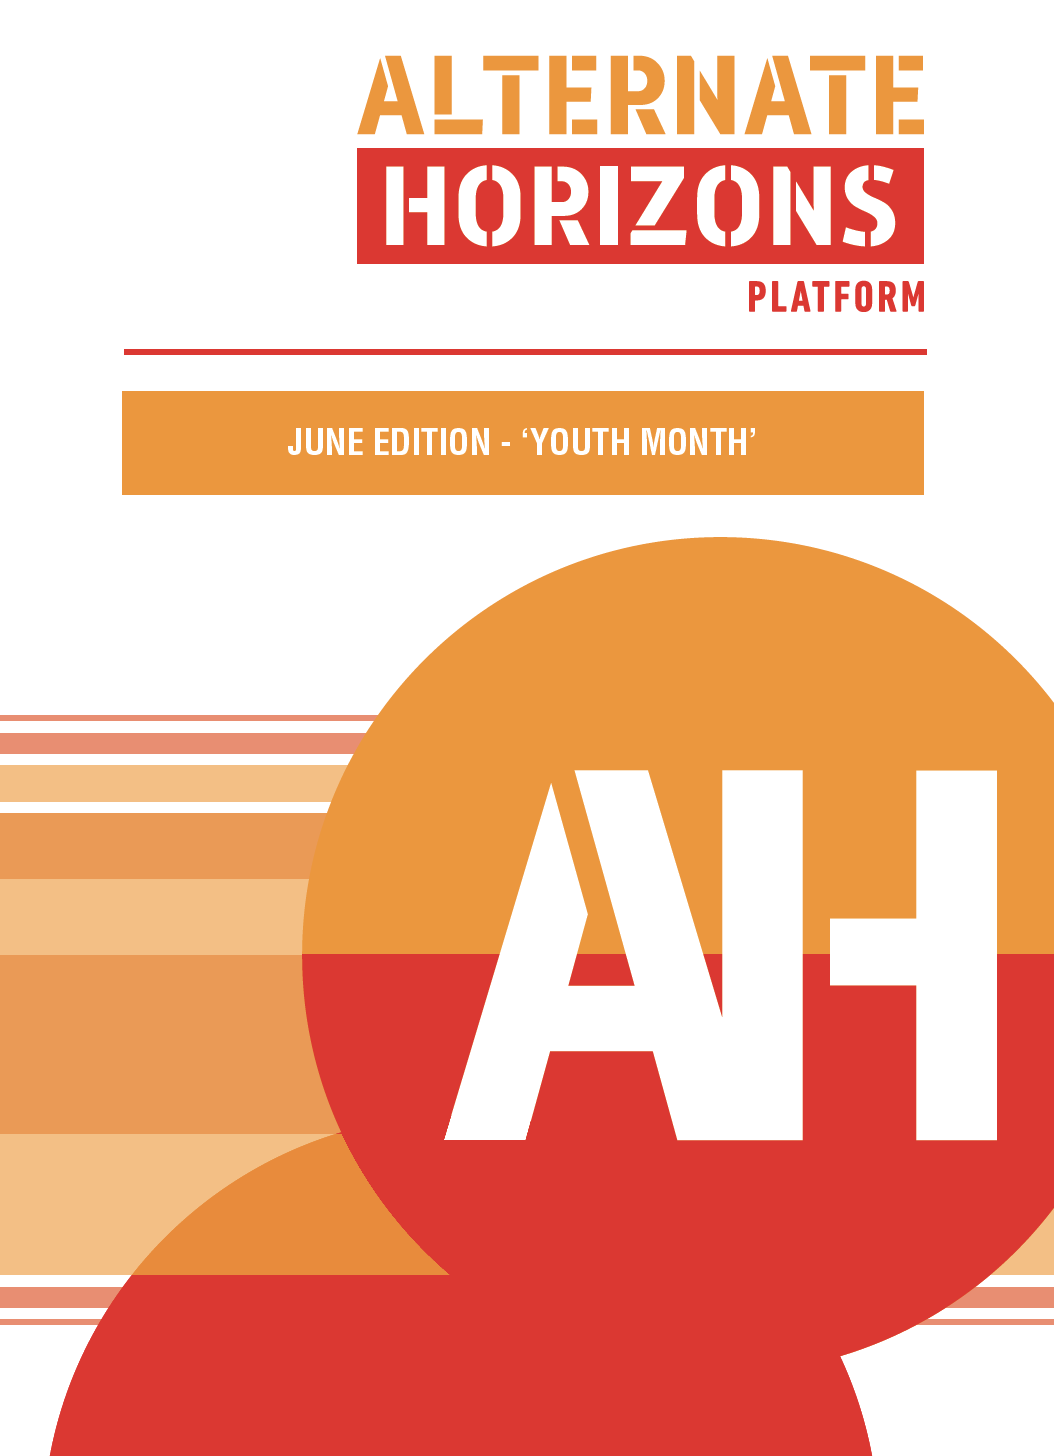 					View 2021: Youth Month
				